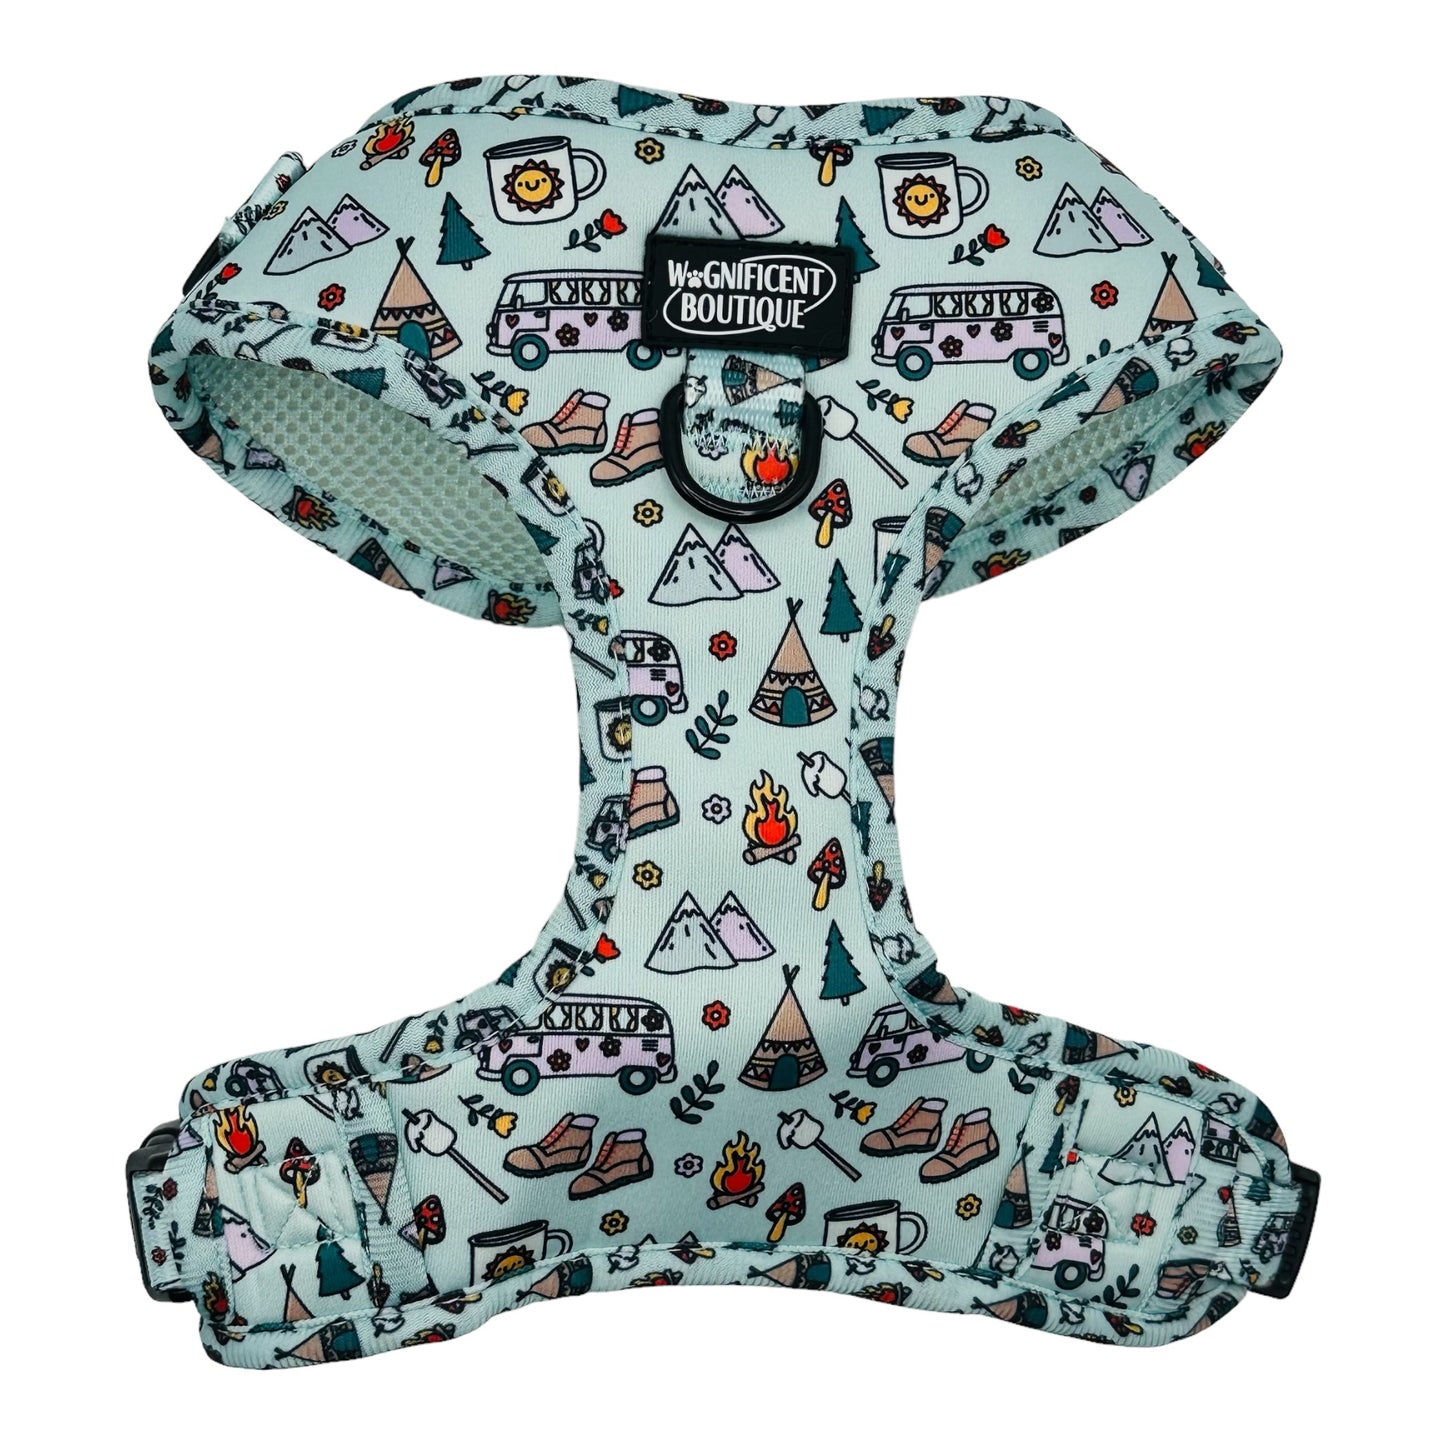 The Great Outdoors Adjustable Dog Harness